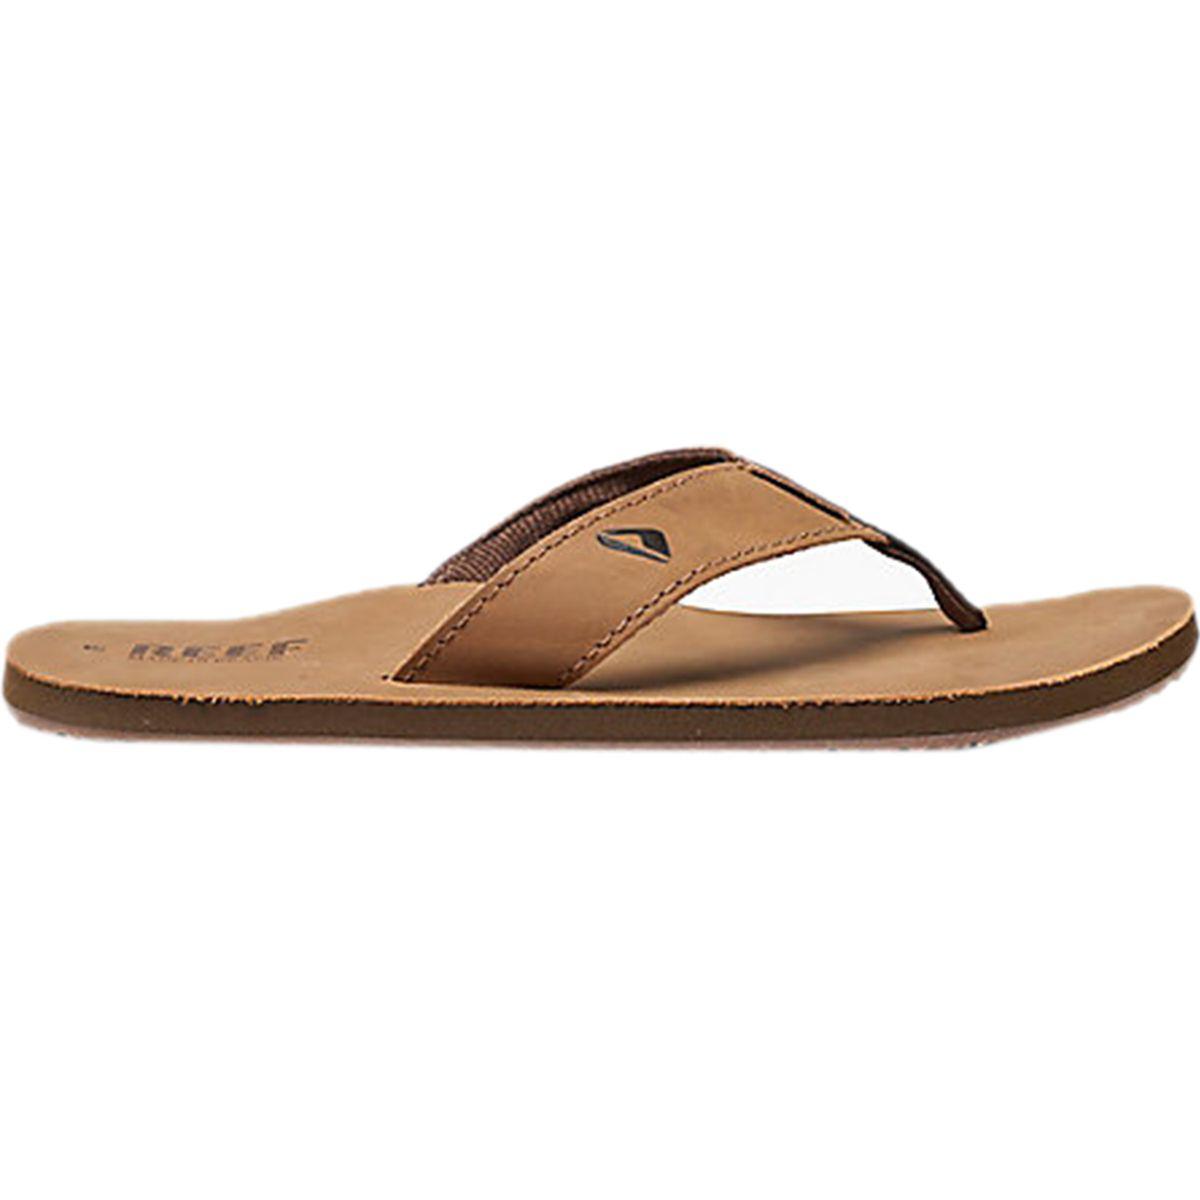 Reef Leather Smoothy Flip Flop in Brown for Men - Lyst